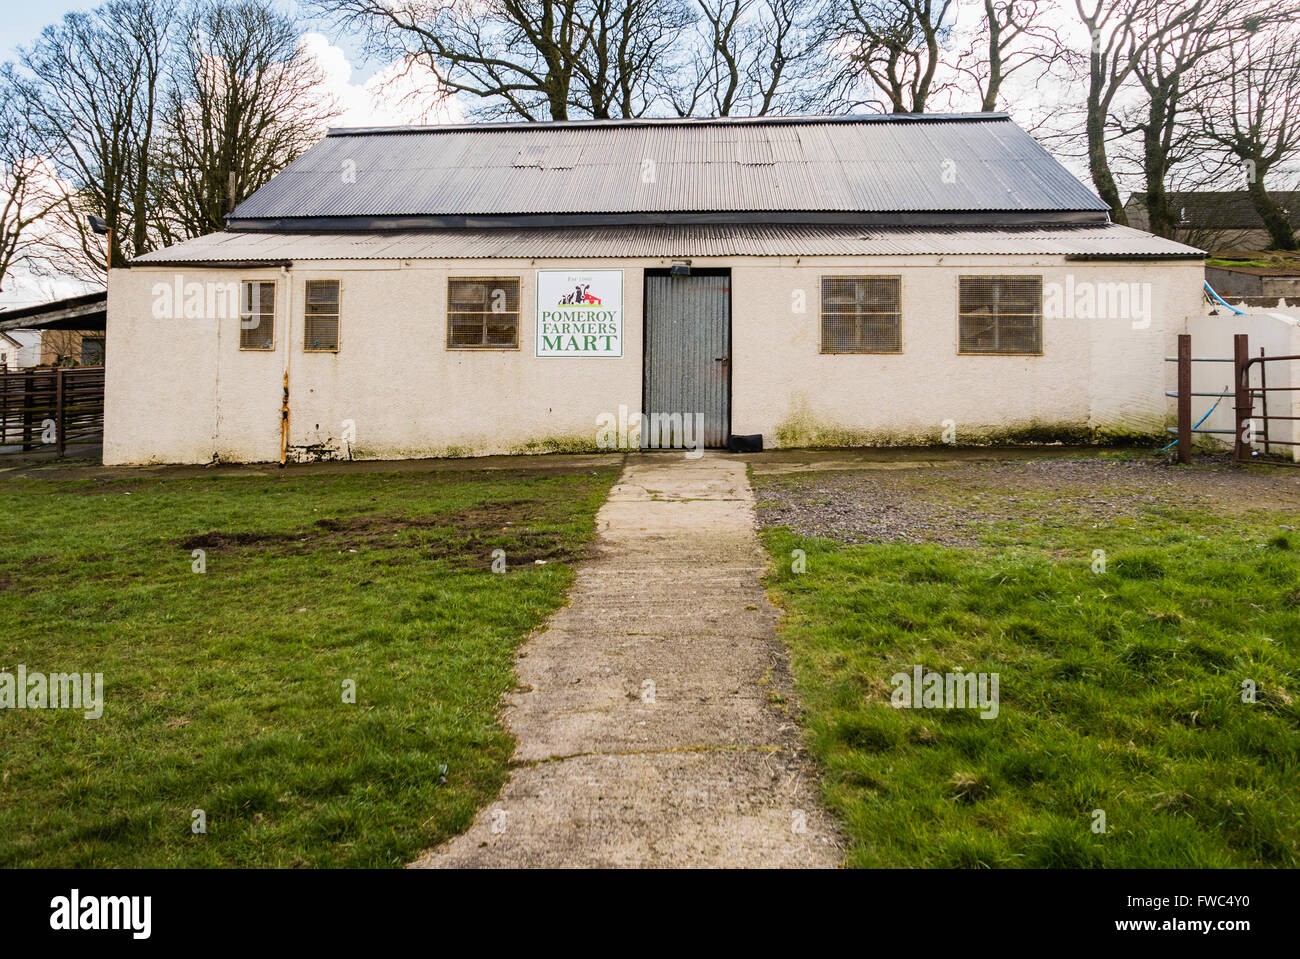 Pomeroy Farmers' Mart building in County Tyrone, Northern Ireland. Stock Photo